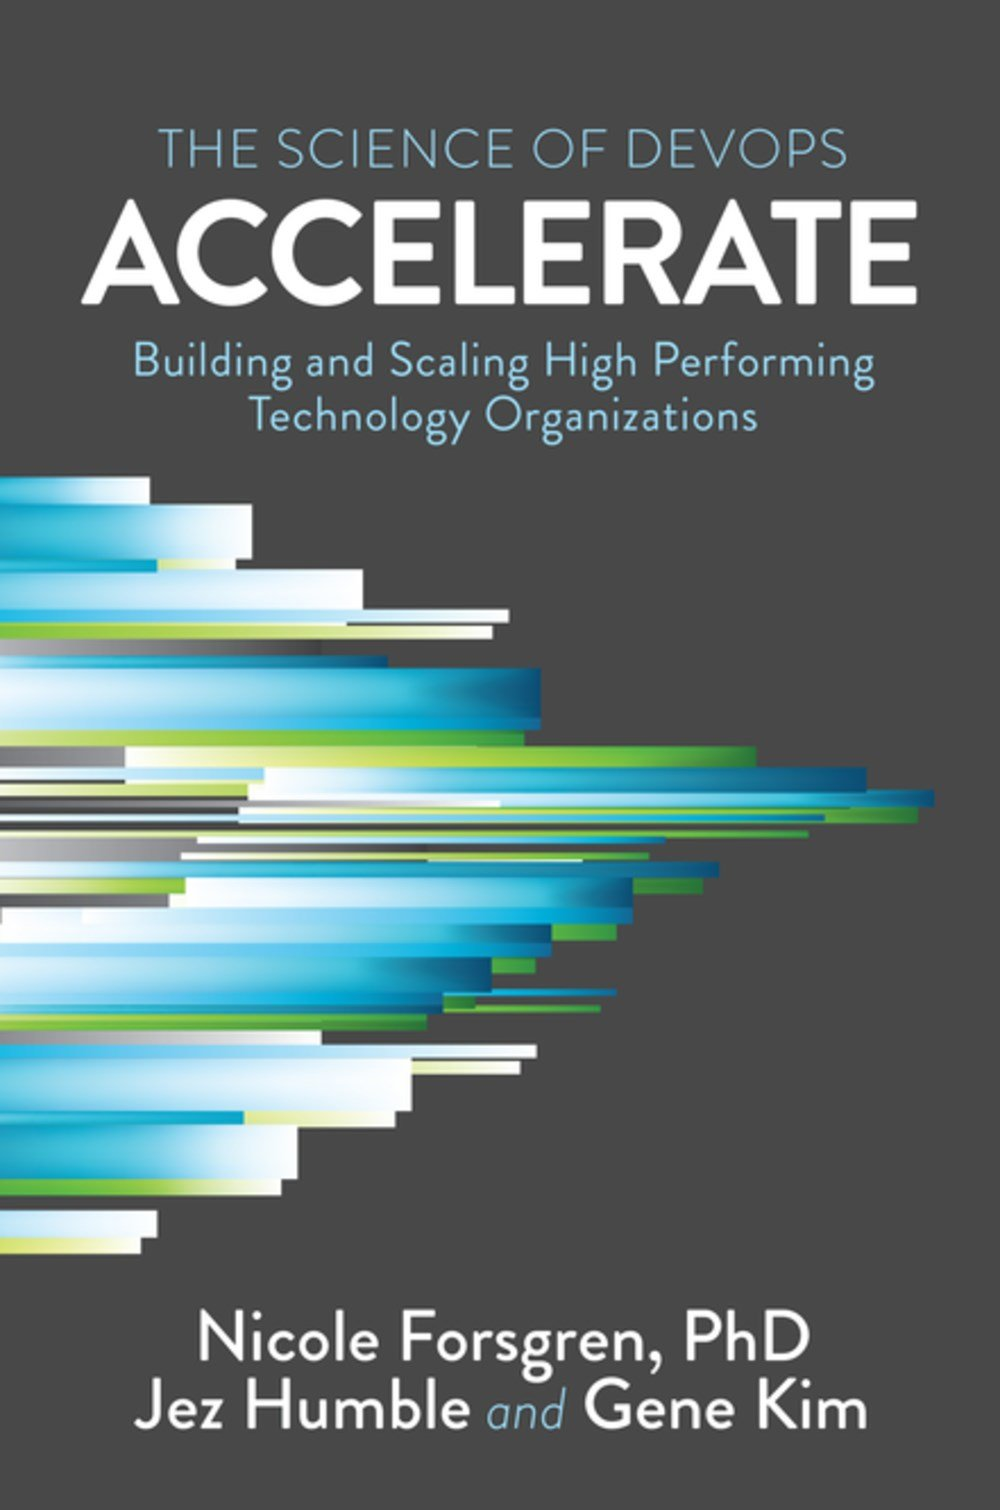 The Accelerate cover features abstract blue and green horizontal bars that suggest a chart